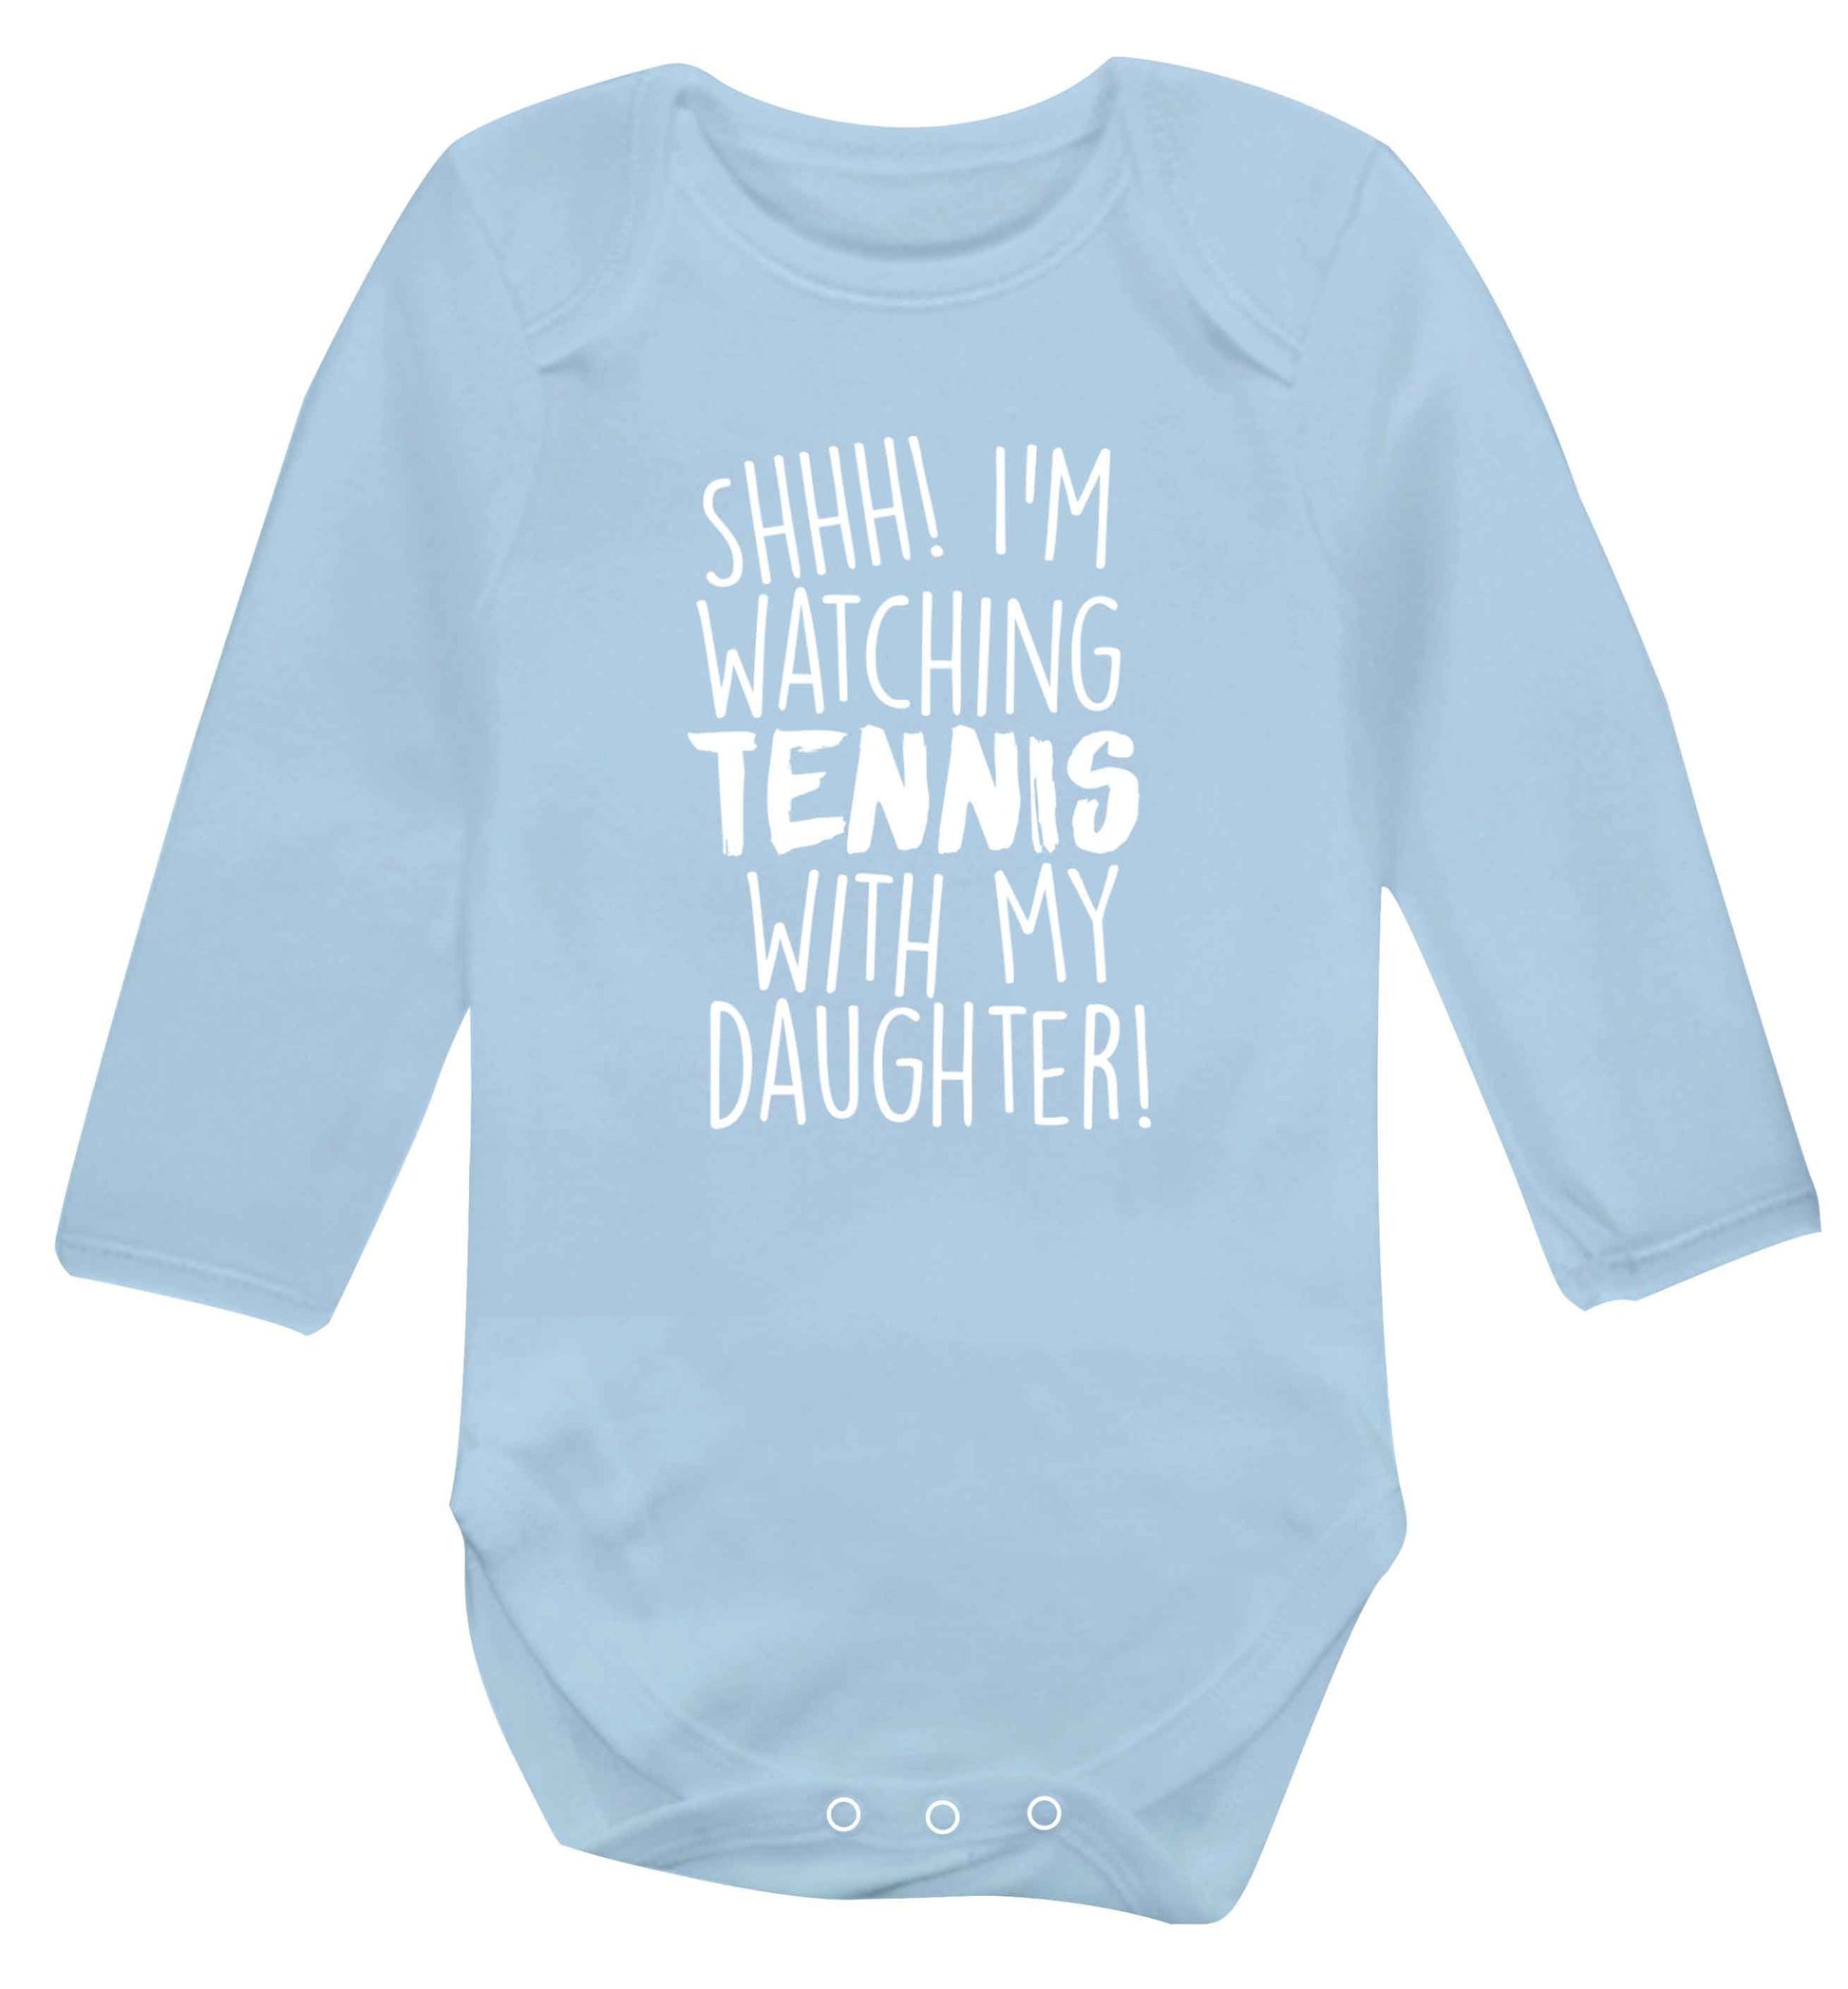 Shh! I'm watching tennis with my daughter! Baby Vest long sleeved pale blue 6-12 months